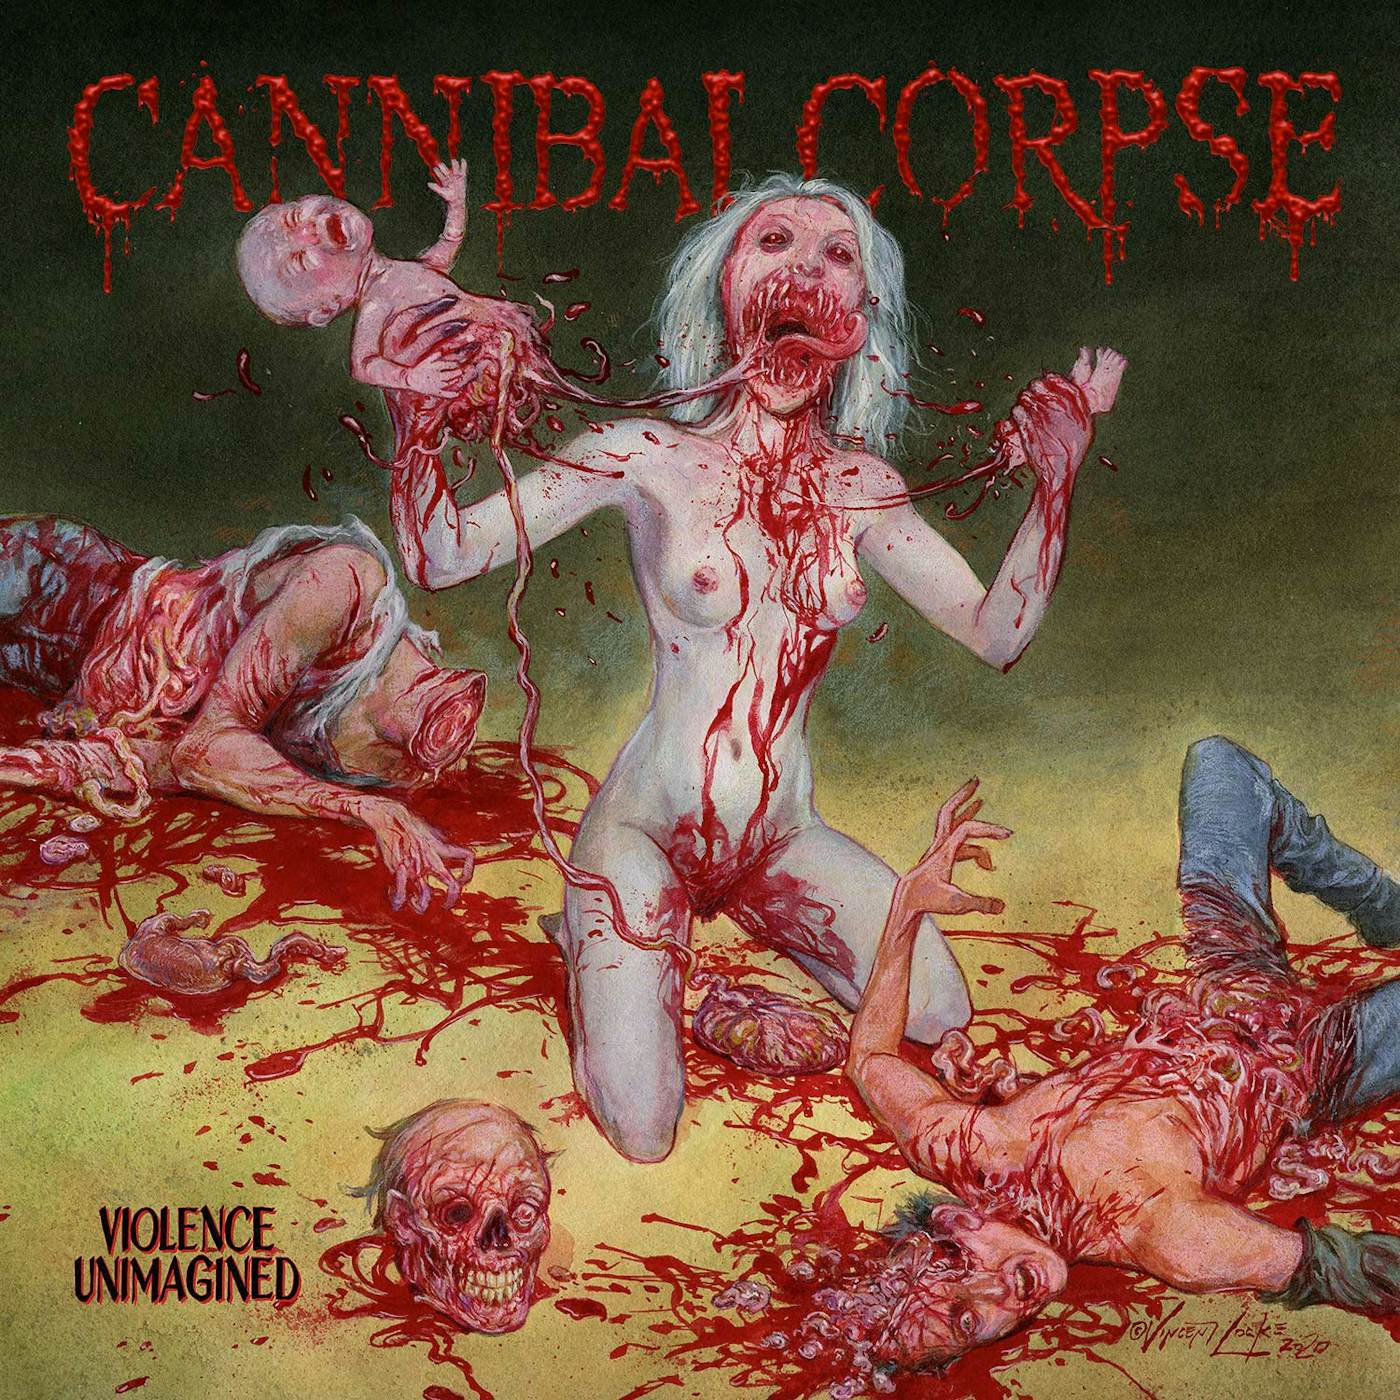 Cannibal Corpse "Violence Unimagined (Red in Clear Alternate Vinyl)" 12"